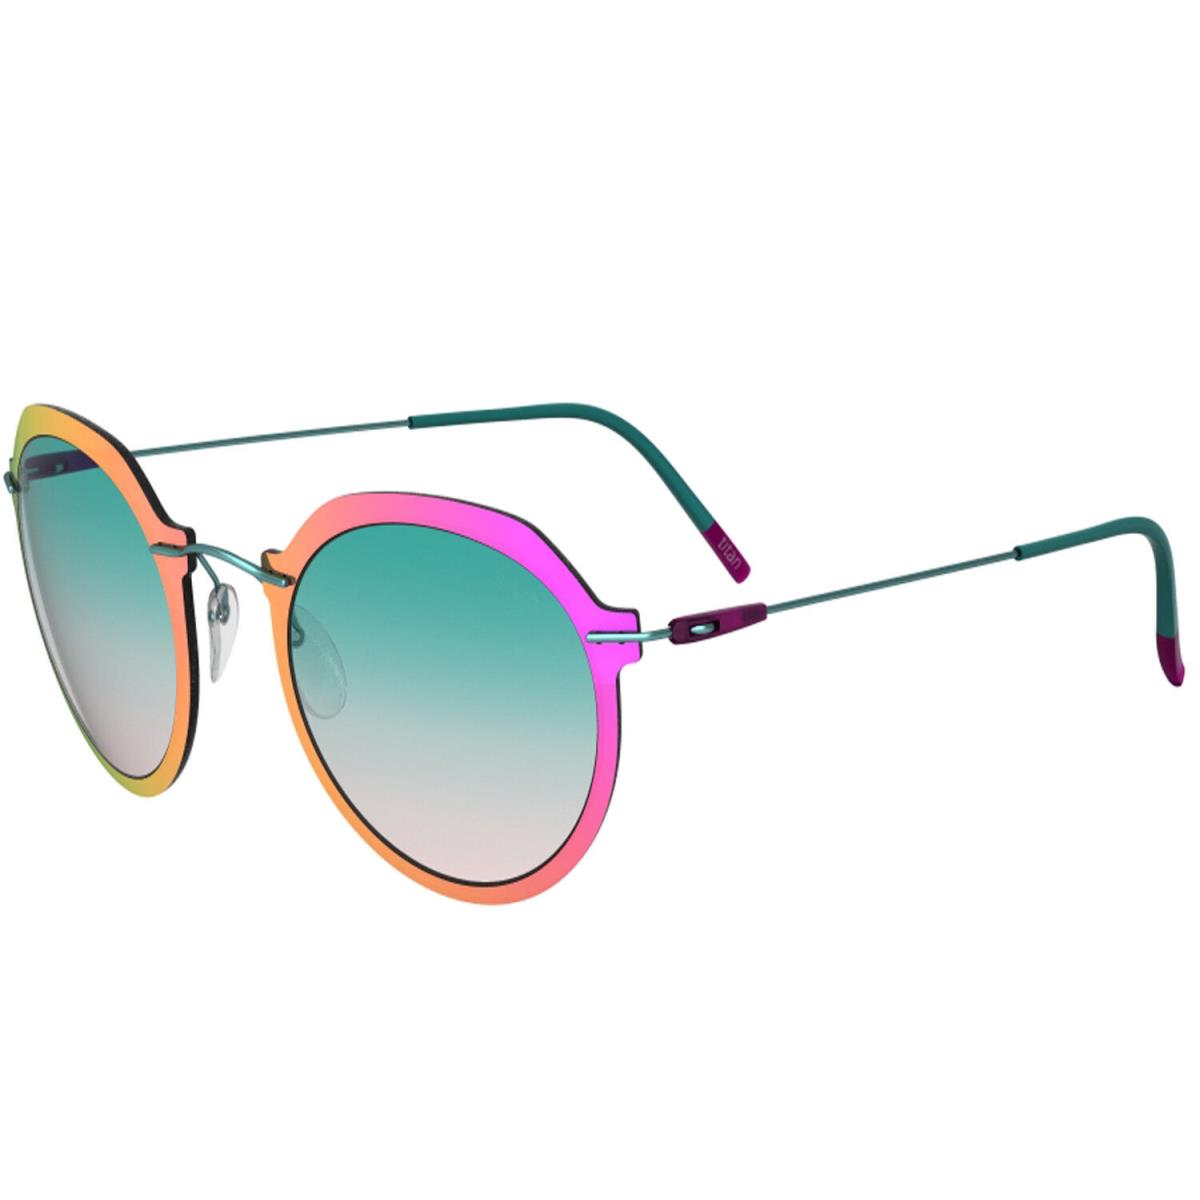 Silhouette Infinity Sunglasses Mint Silky Matte / Teal Rose Grad 8695-75-5040